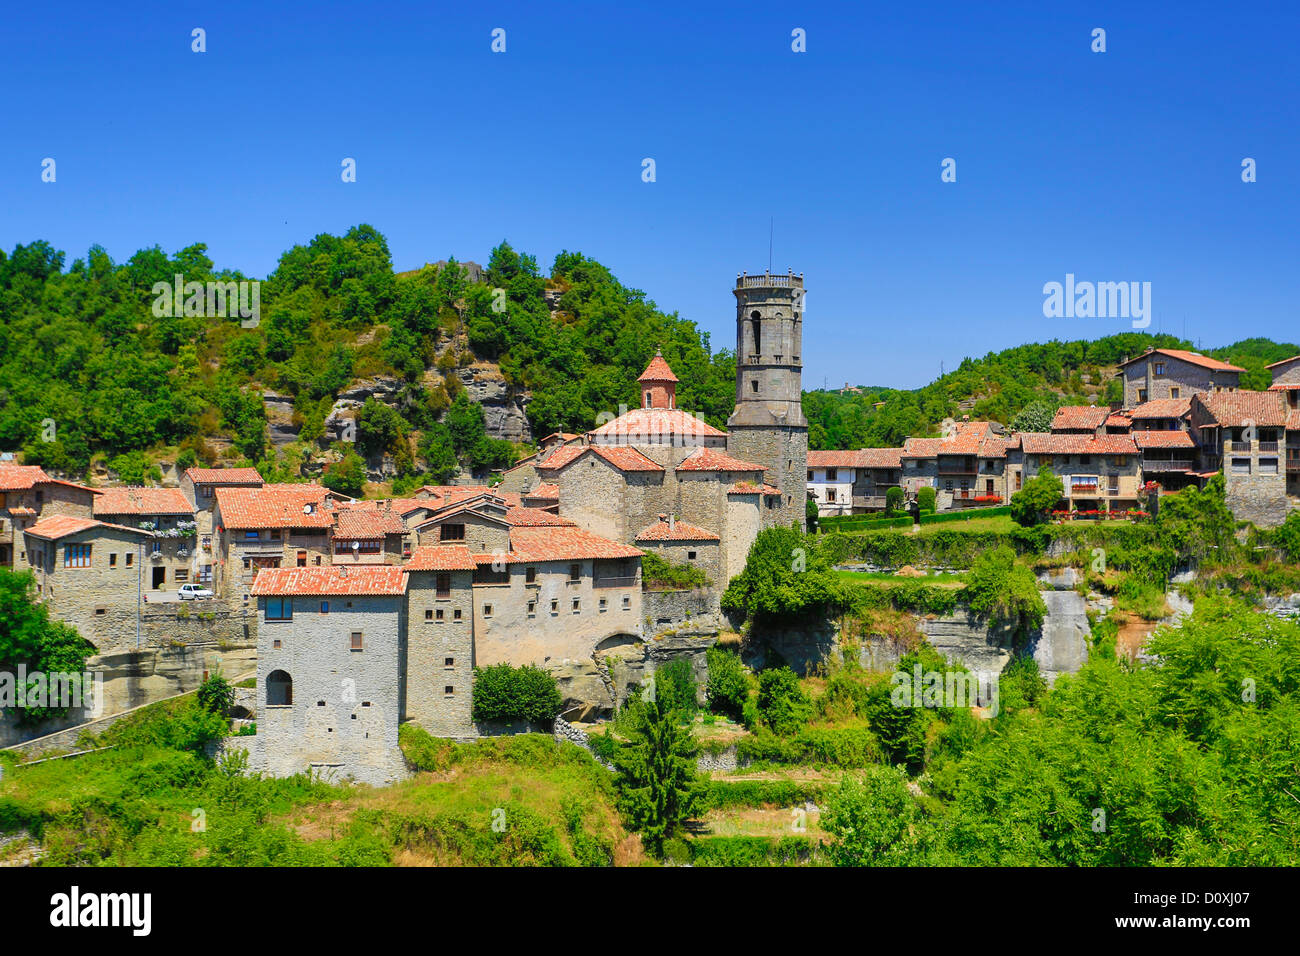 Spain, Europe, Catalonia, Barcelona Province, Rupit, town, architecture, belfry, church, medieval, natural, picturesque, skyline Stock Photo